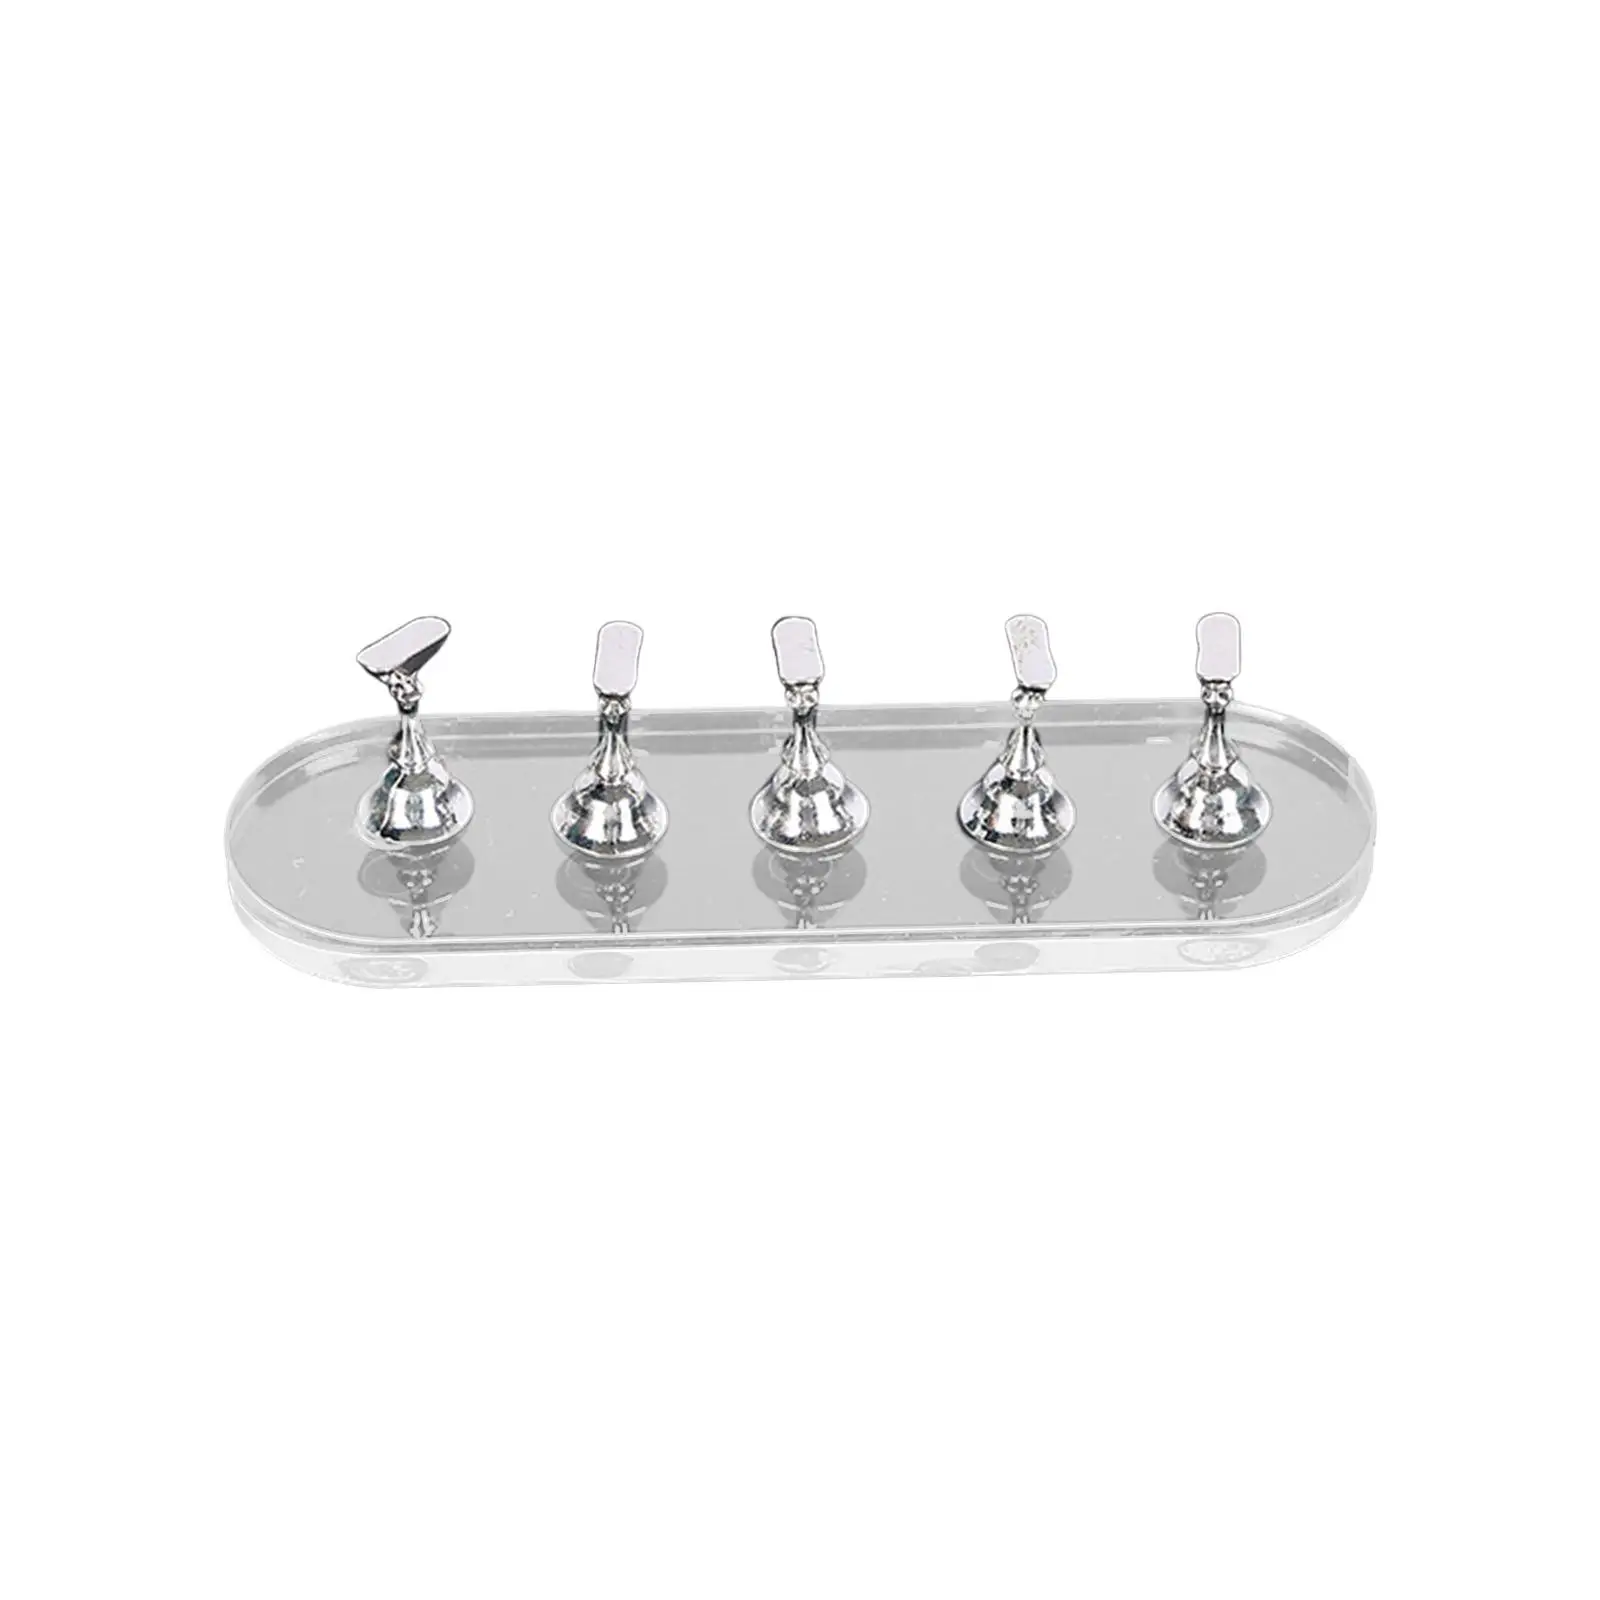 Nail Practice Stand Press on Nails Training Reusable Acrylic Manicure Tool Fake Nail Holder Nail Stand for Home Beginner Salon